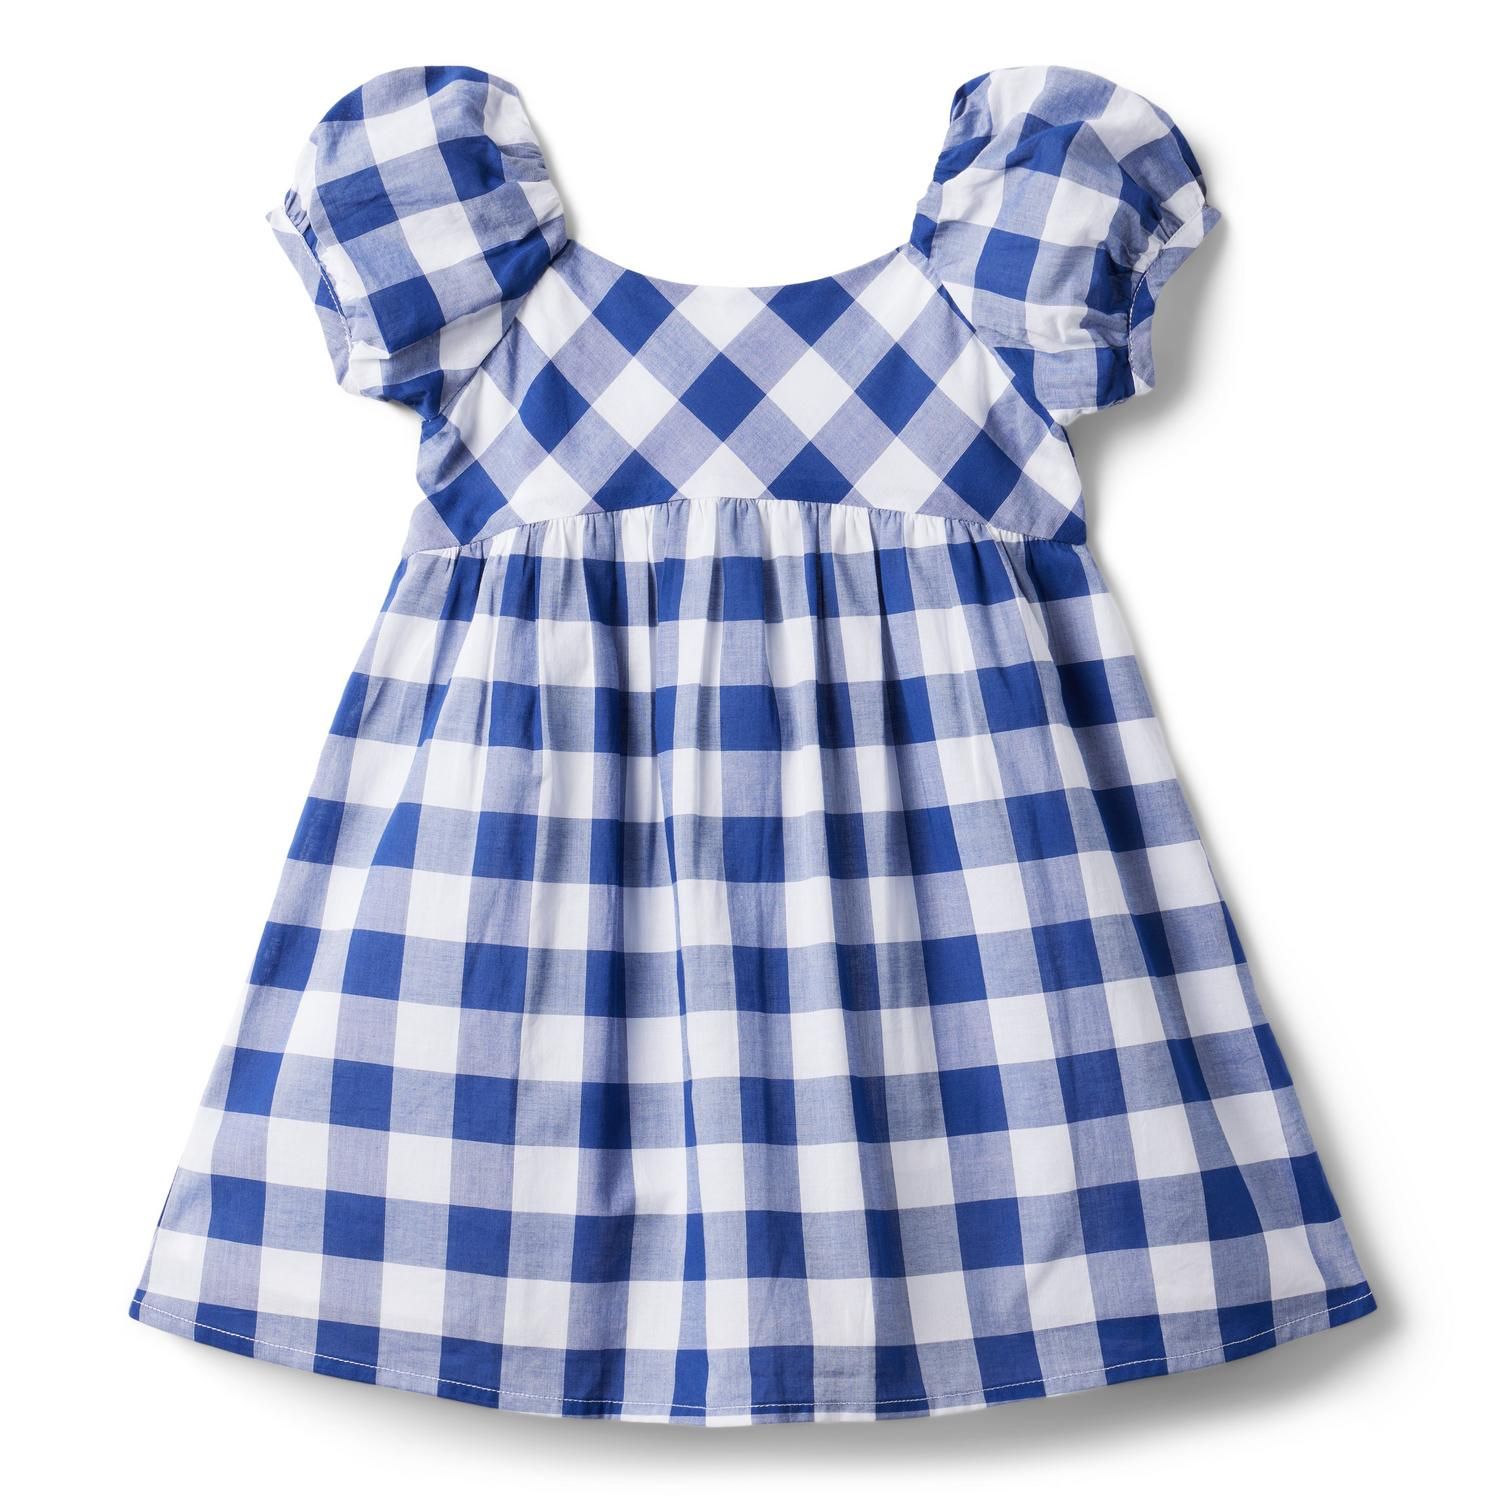 The Picnic Perfect Dress | Janie and Jack